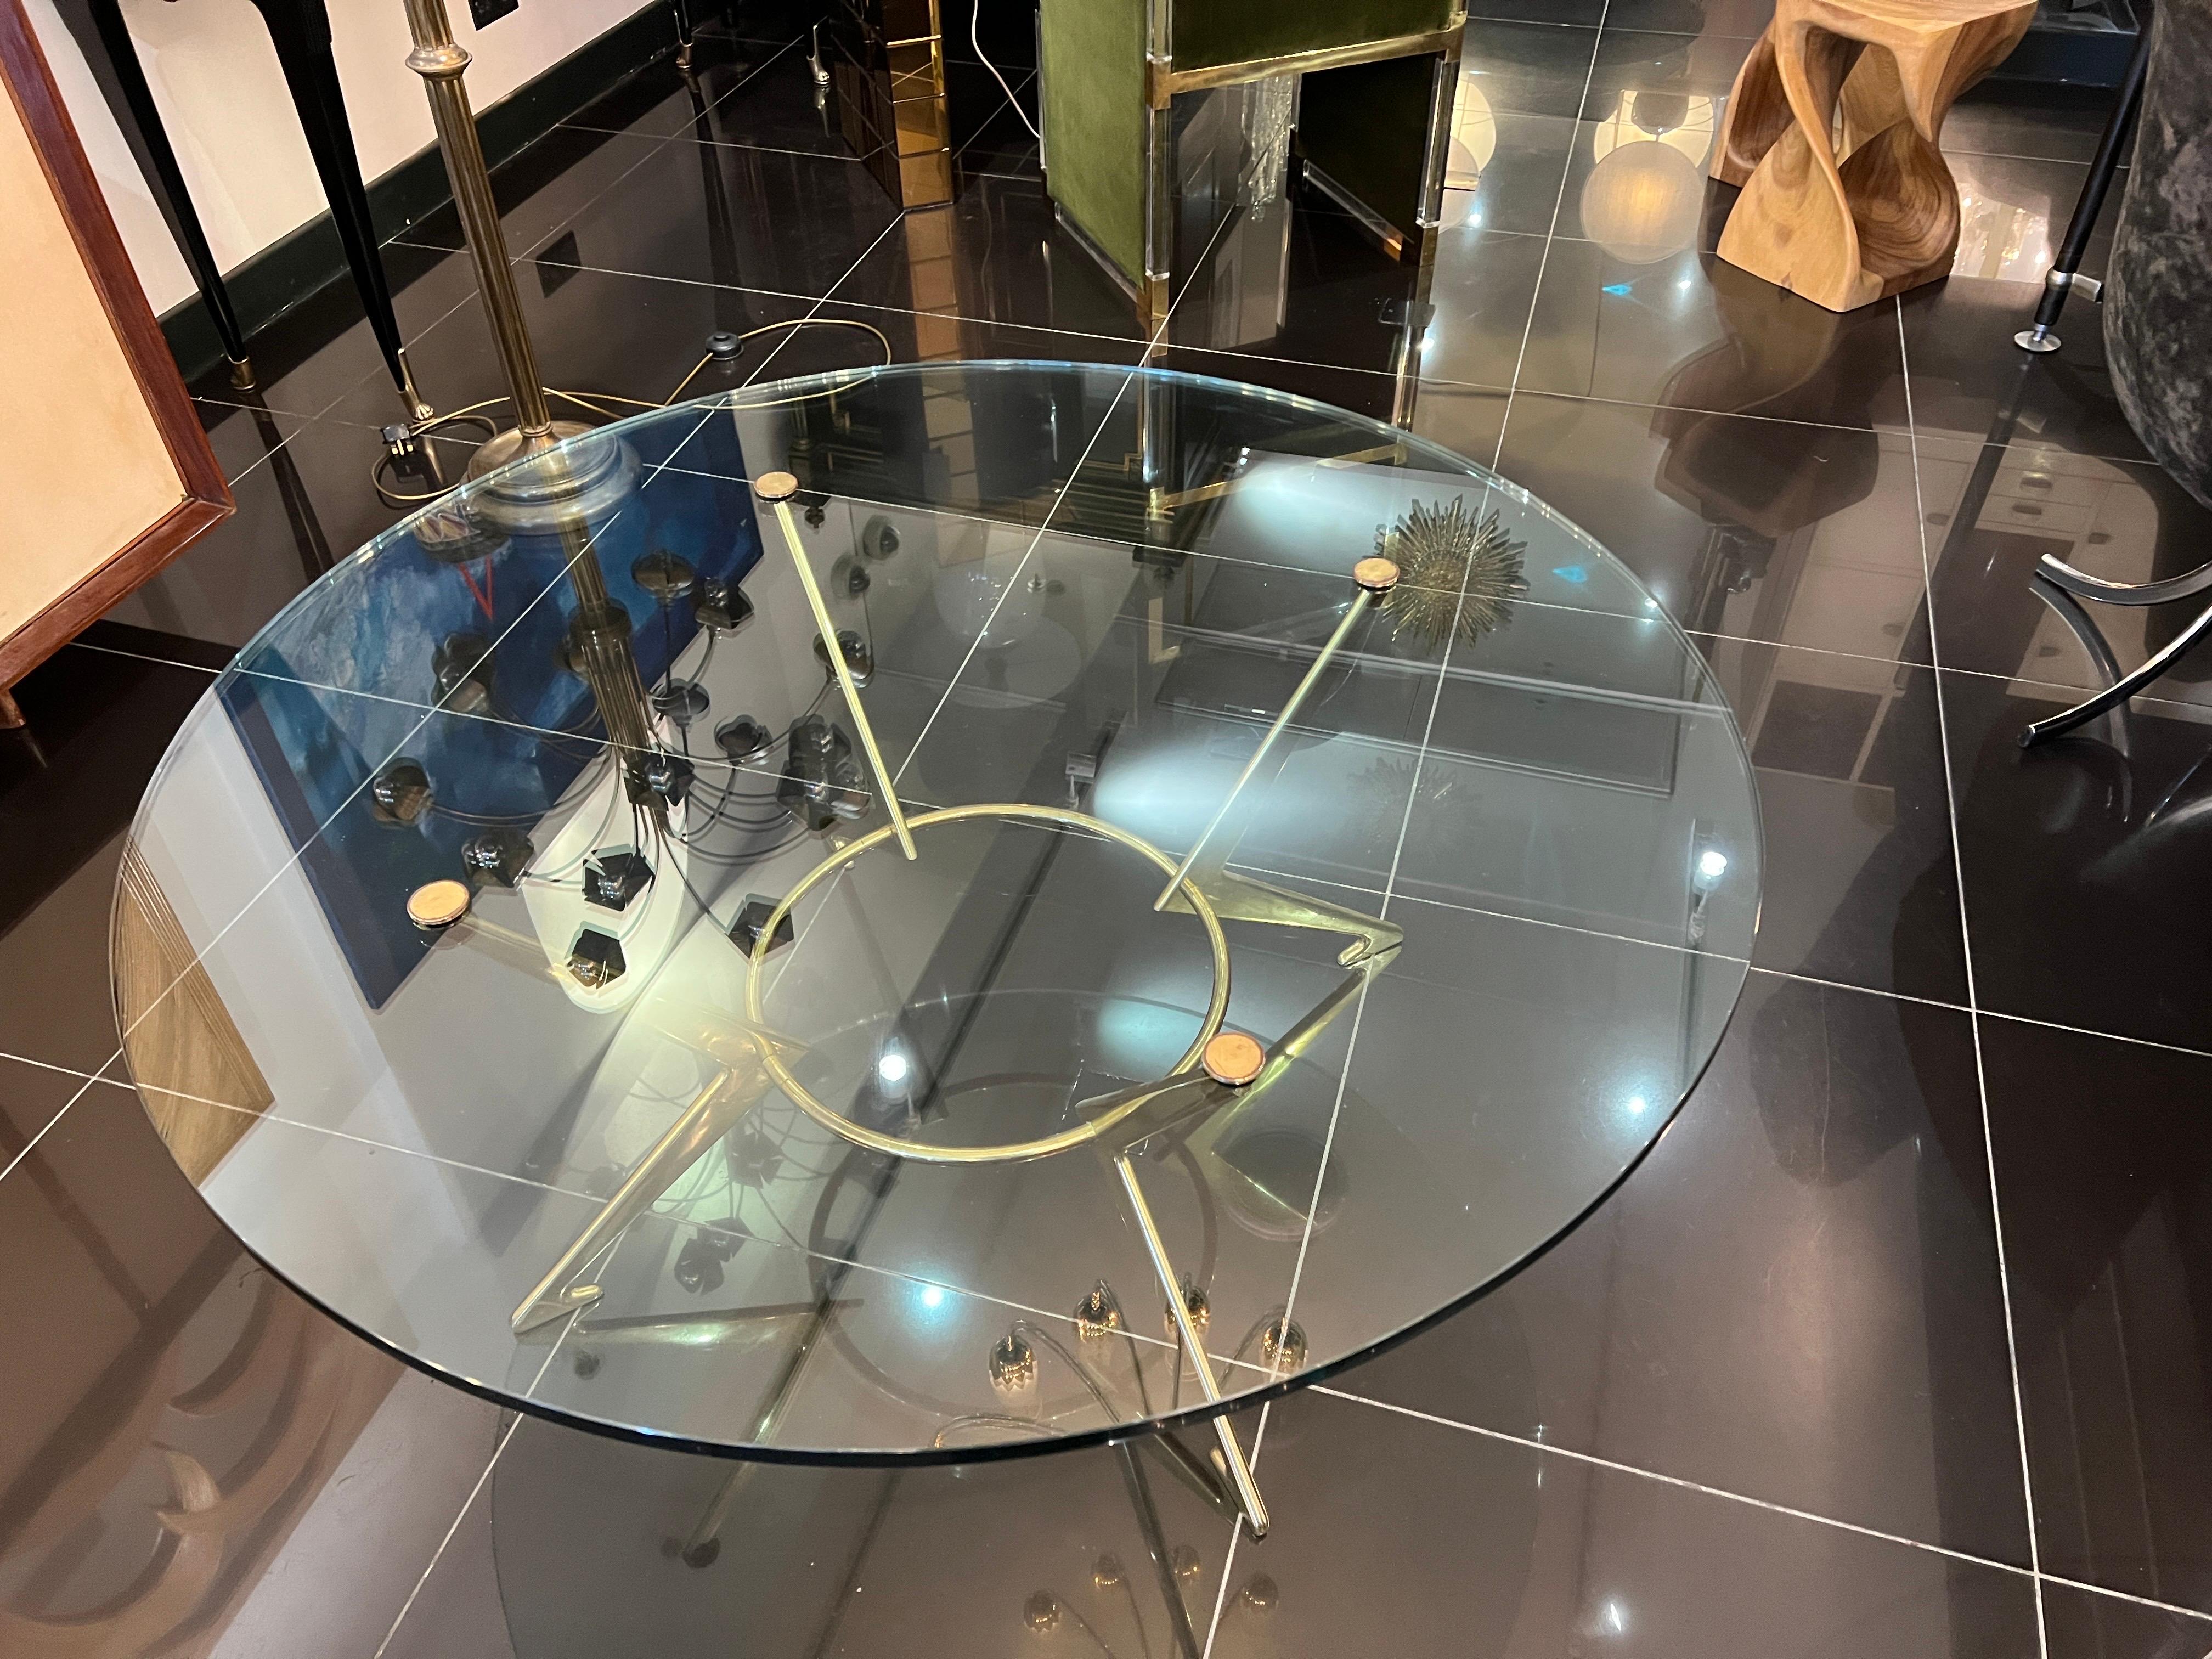 An extraordinary large circular coffee table consisting of 20mm thick round glass top 120cm (47.5 inches) in diameter supported by architecturally designed solid brass base with brass upper bolts . A truly magnificent centre piece designed and